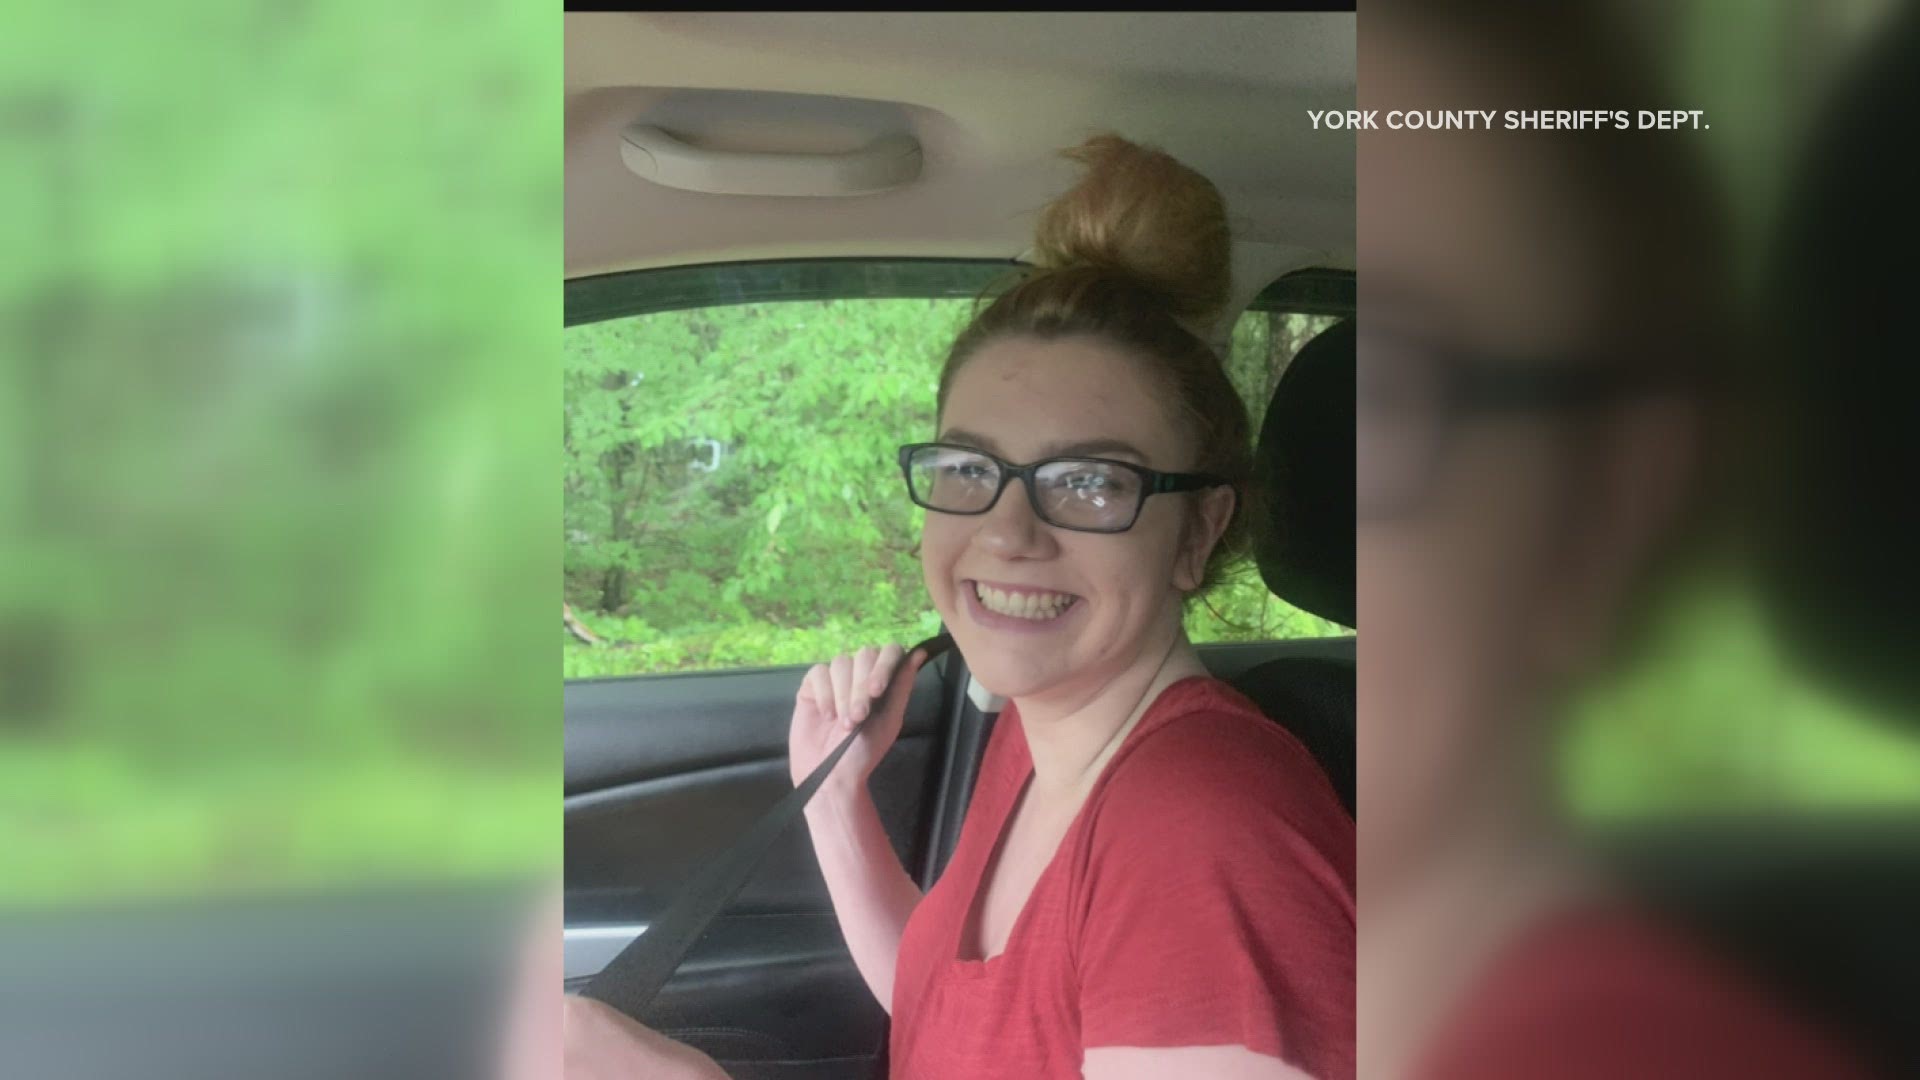 The York County Sheriff's Office is asking the public for help in finding a 15-year-old girl from Arundel.